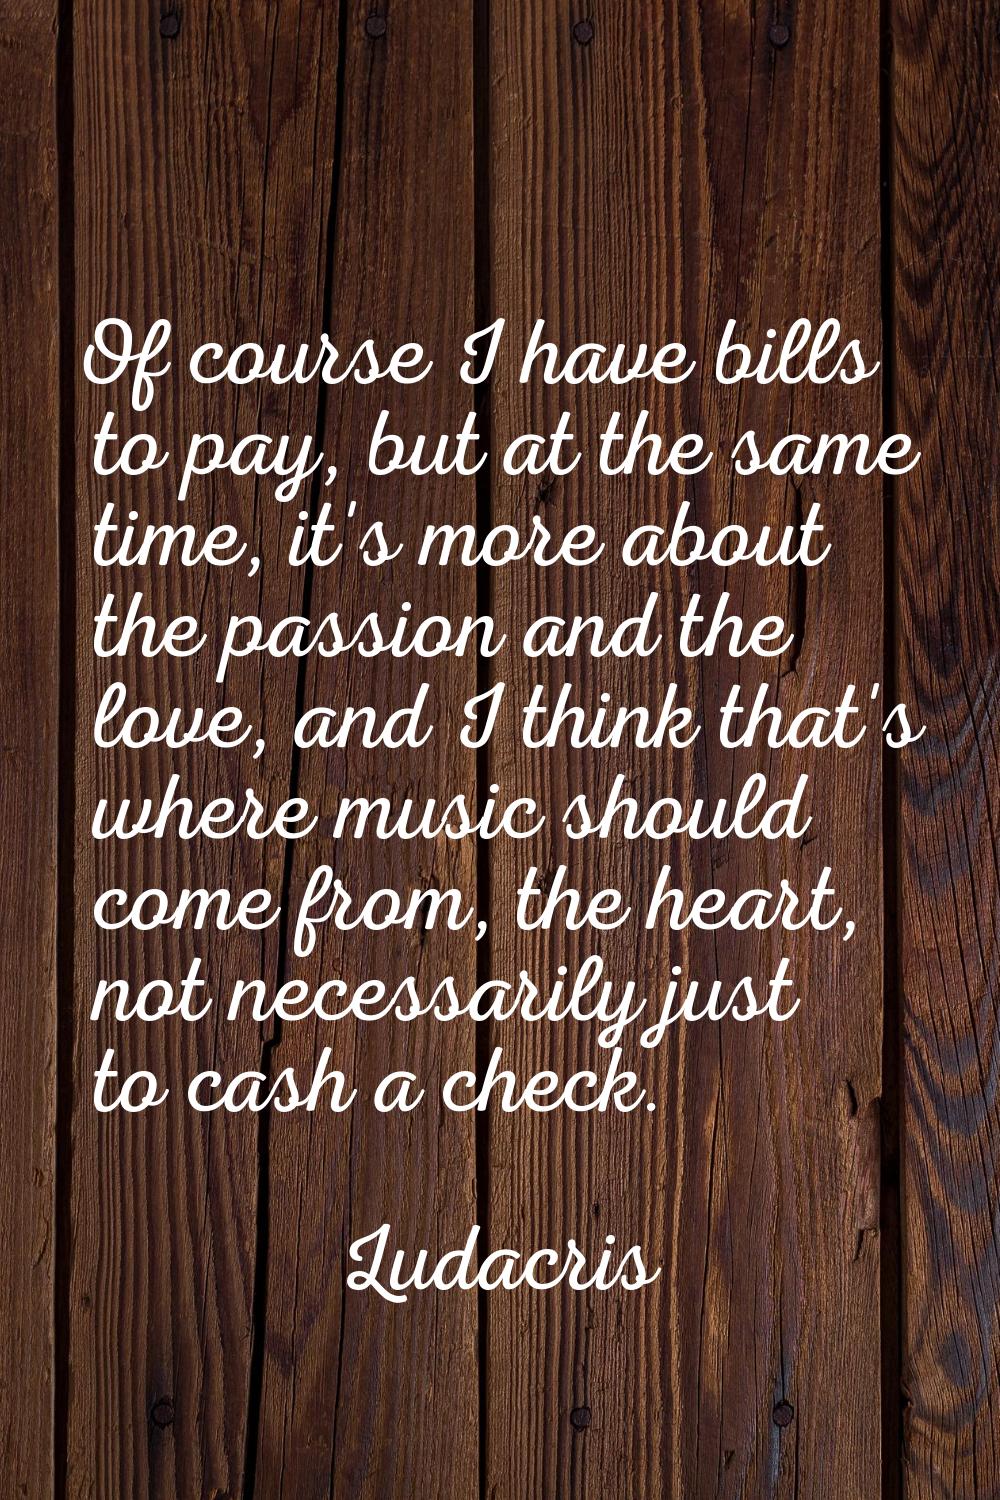 Of course I have bills to pay, but at the same time, it's more about the passion and the love, and 